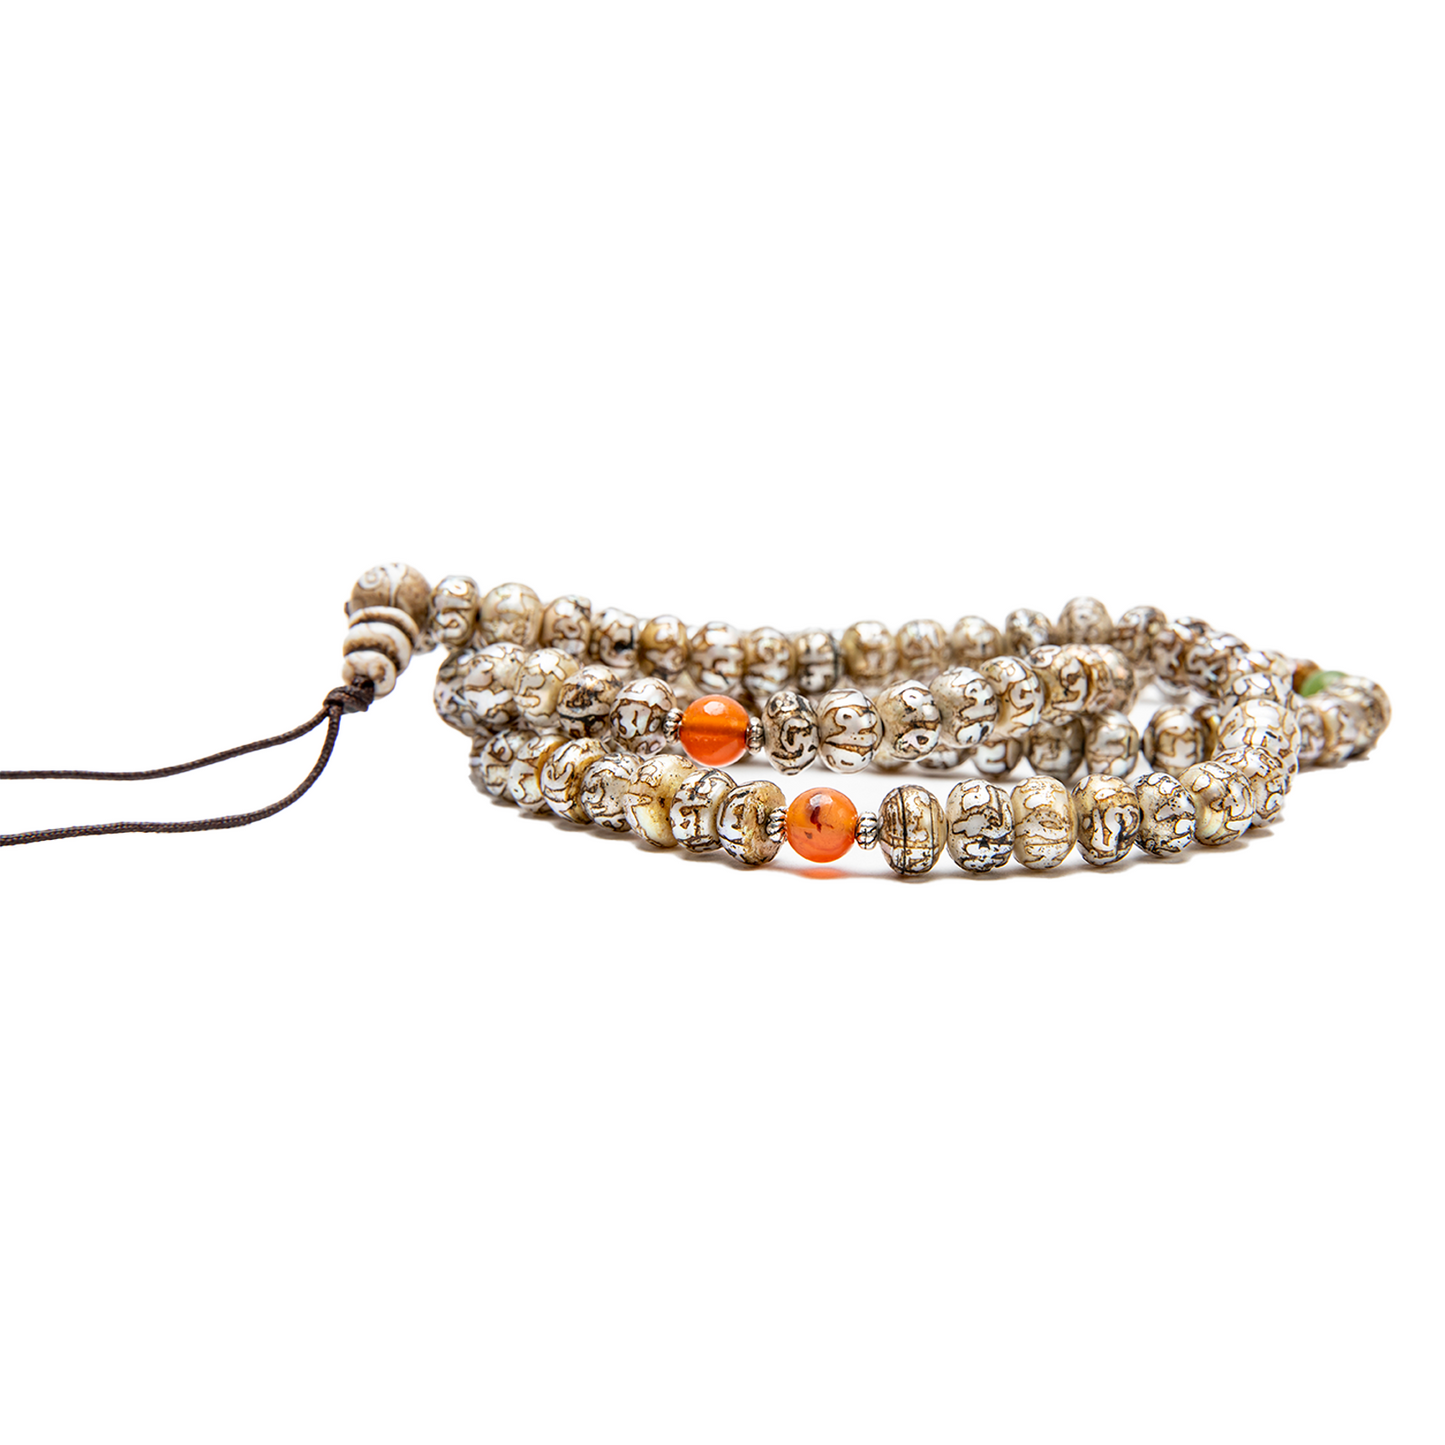 Close-up of the Fresh Water Pearl Mala on a solid white backdrop. The mala rests flat at nearly eye-level, with the carnelian beads on display.